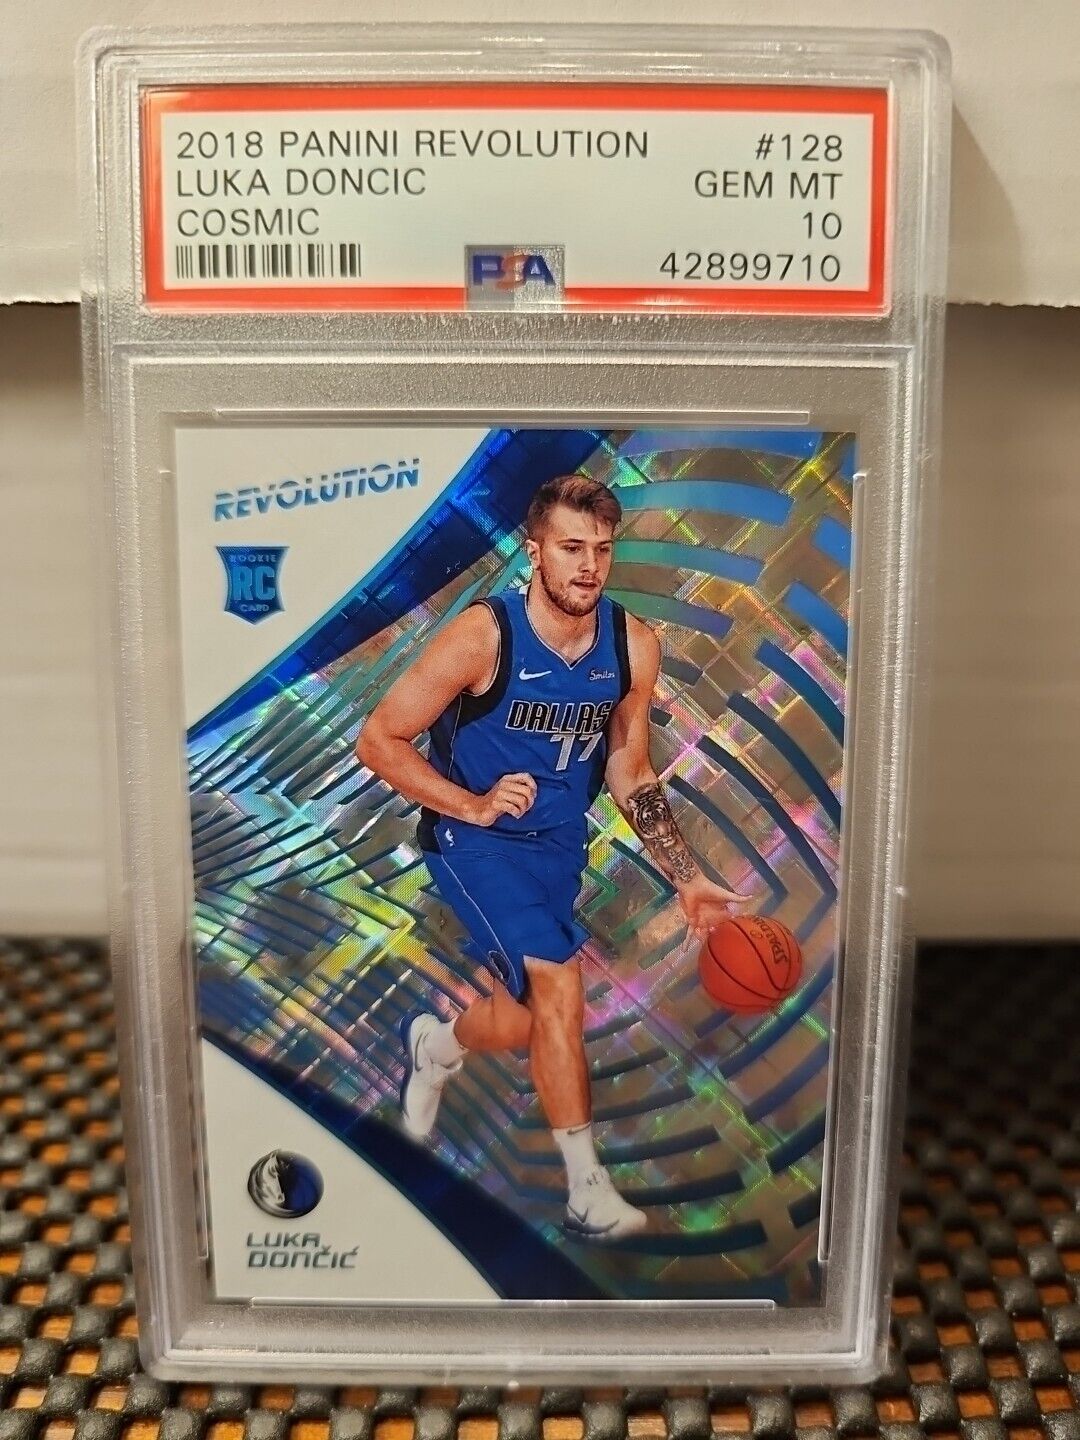 2018-19 Luka Doncic PSA 10 /100 Cosmic Revolution Rookie RC #128